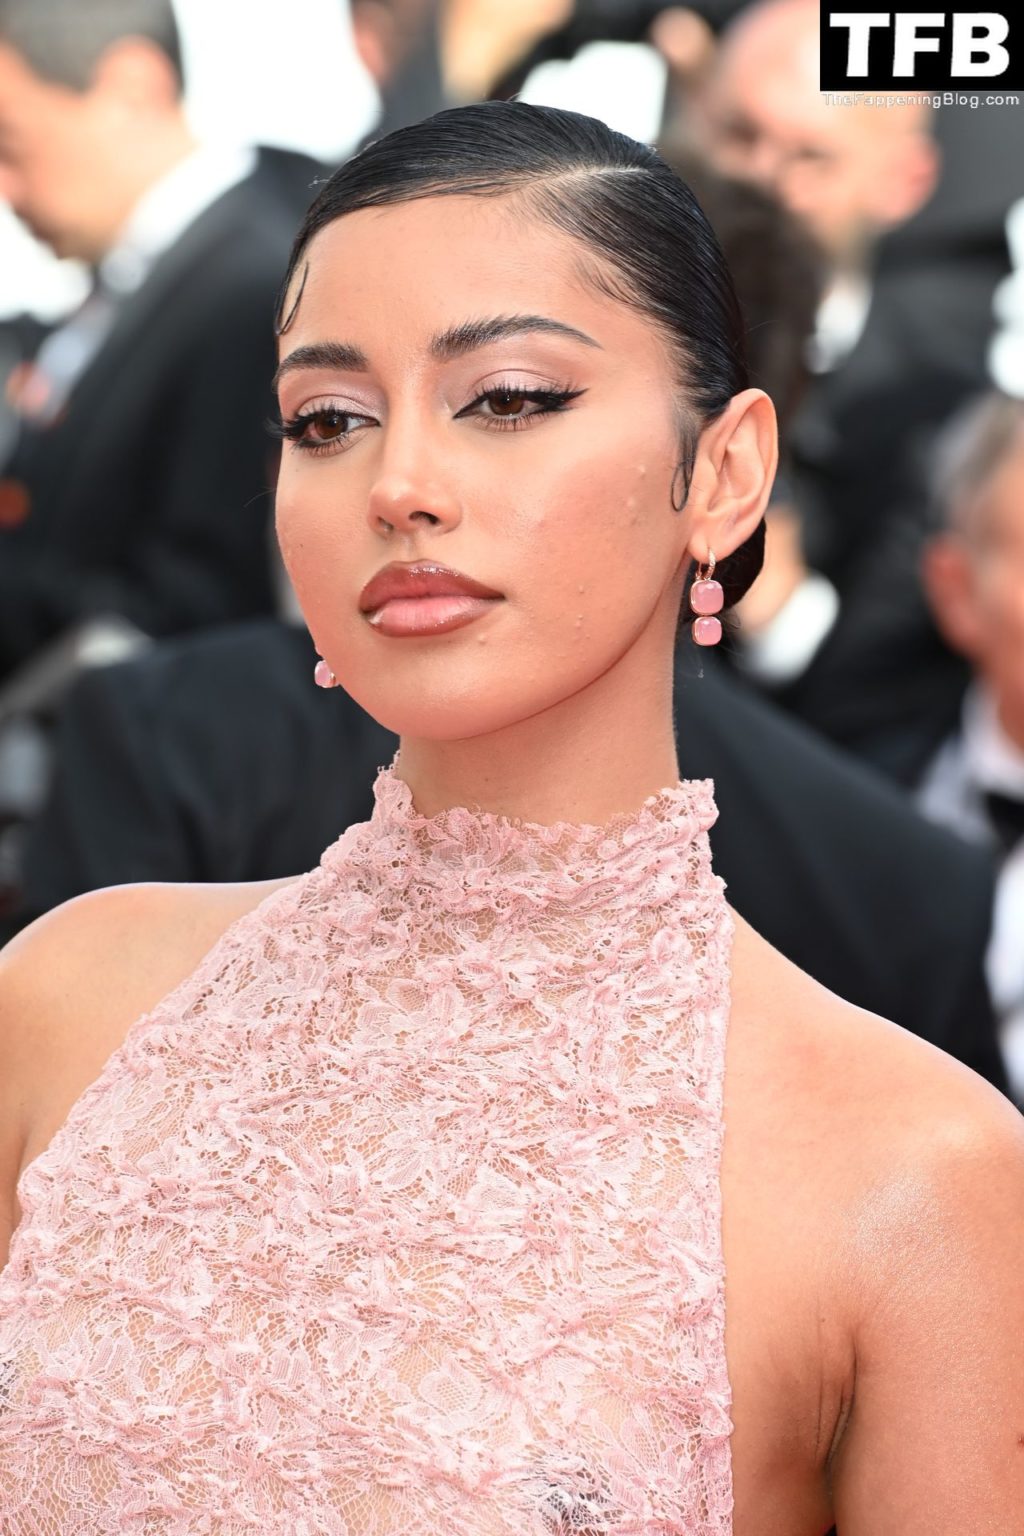 Cindy Kimberly See Through Nudity The Fappening Blog 9 2 1024x1536 - Cindy Kimberly Displays Her Nude Tits at the 75th Annual Cannes Film Festival (29 Photos)